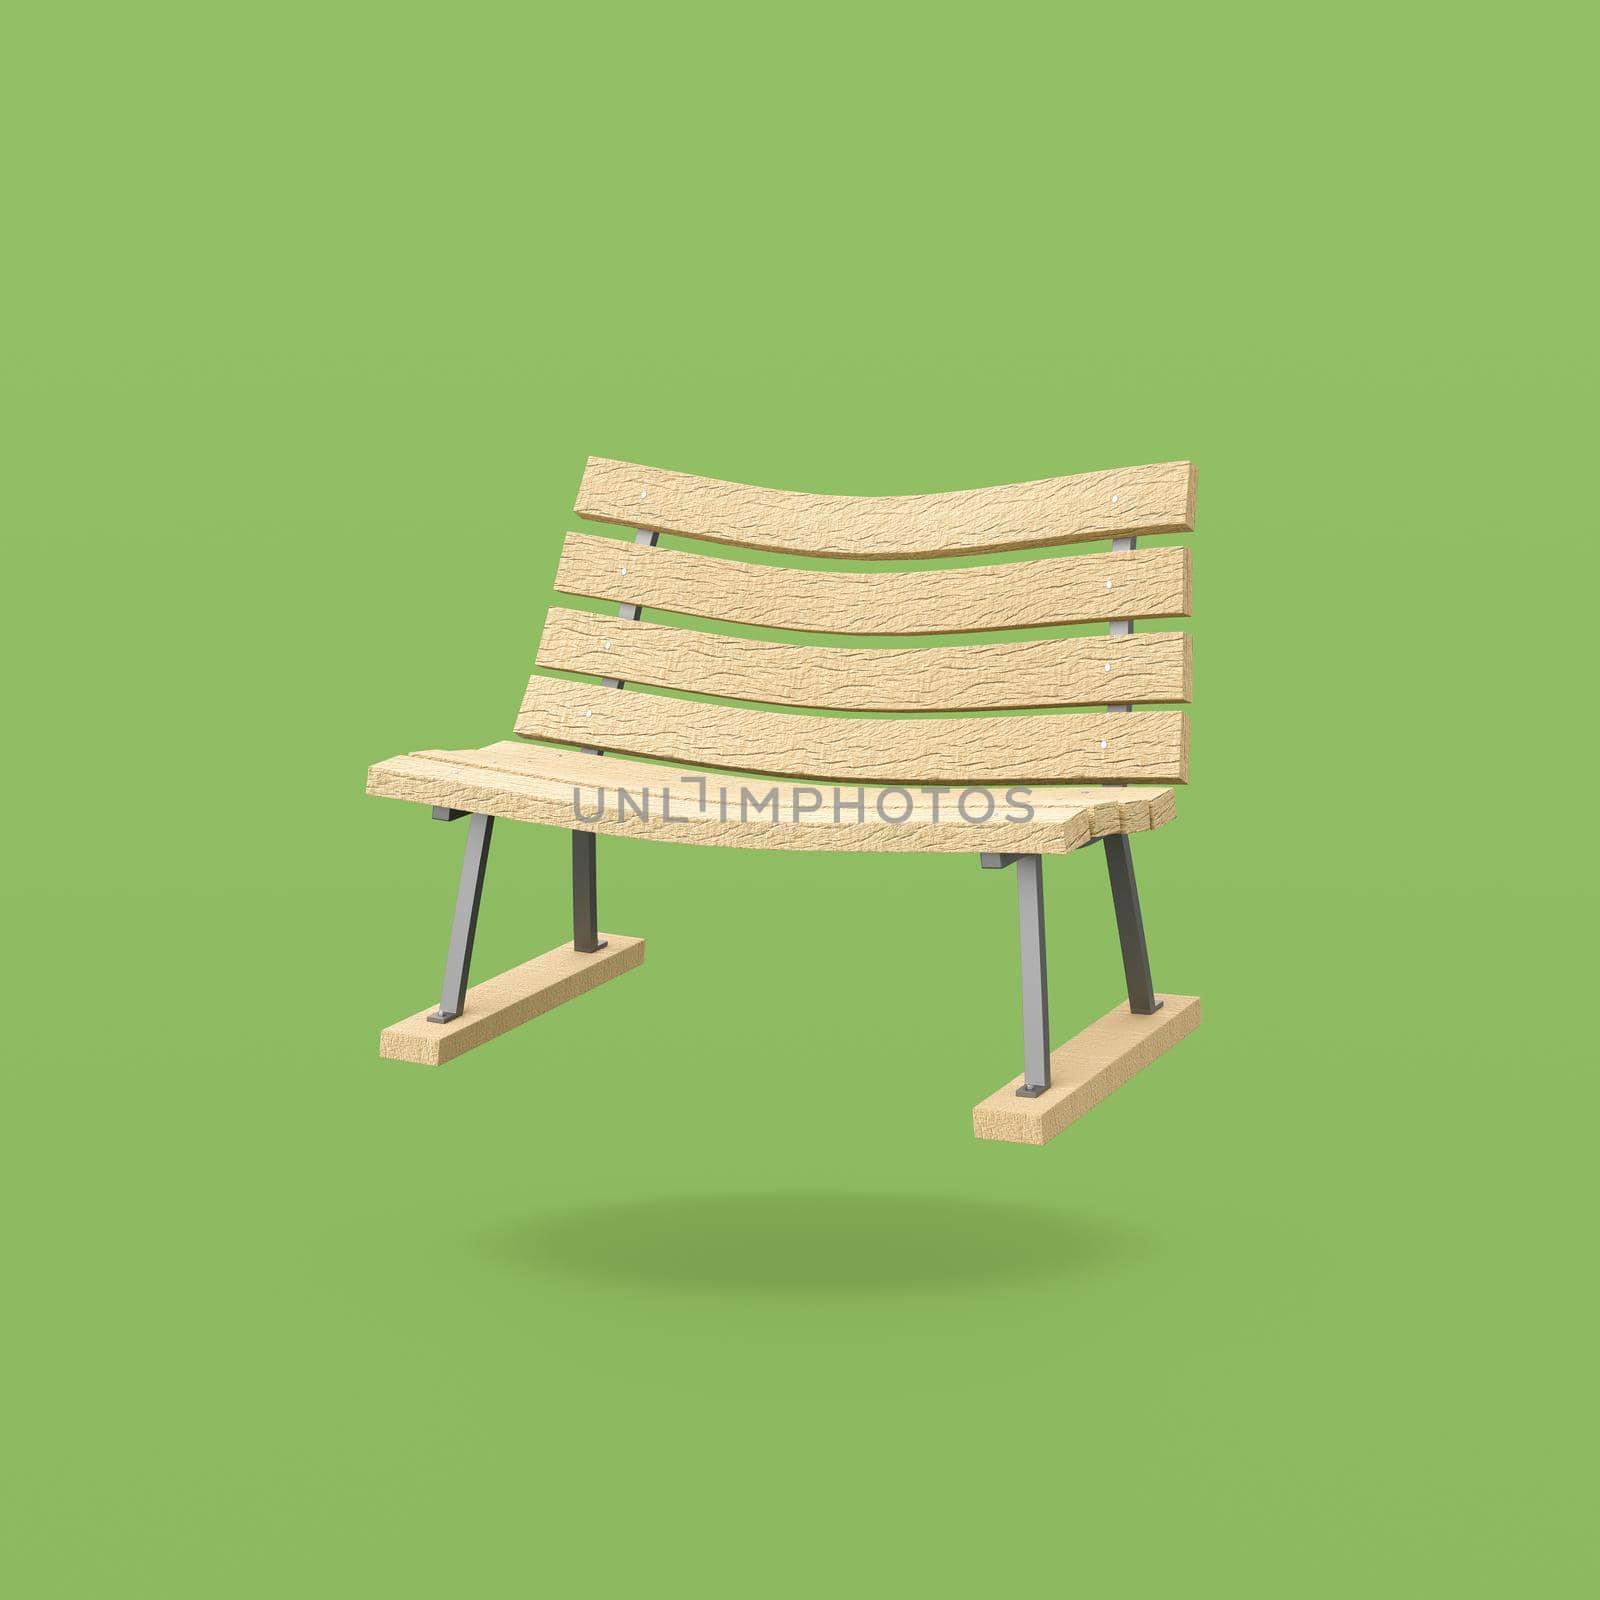 Funny Wooden Bench on Green Background by make